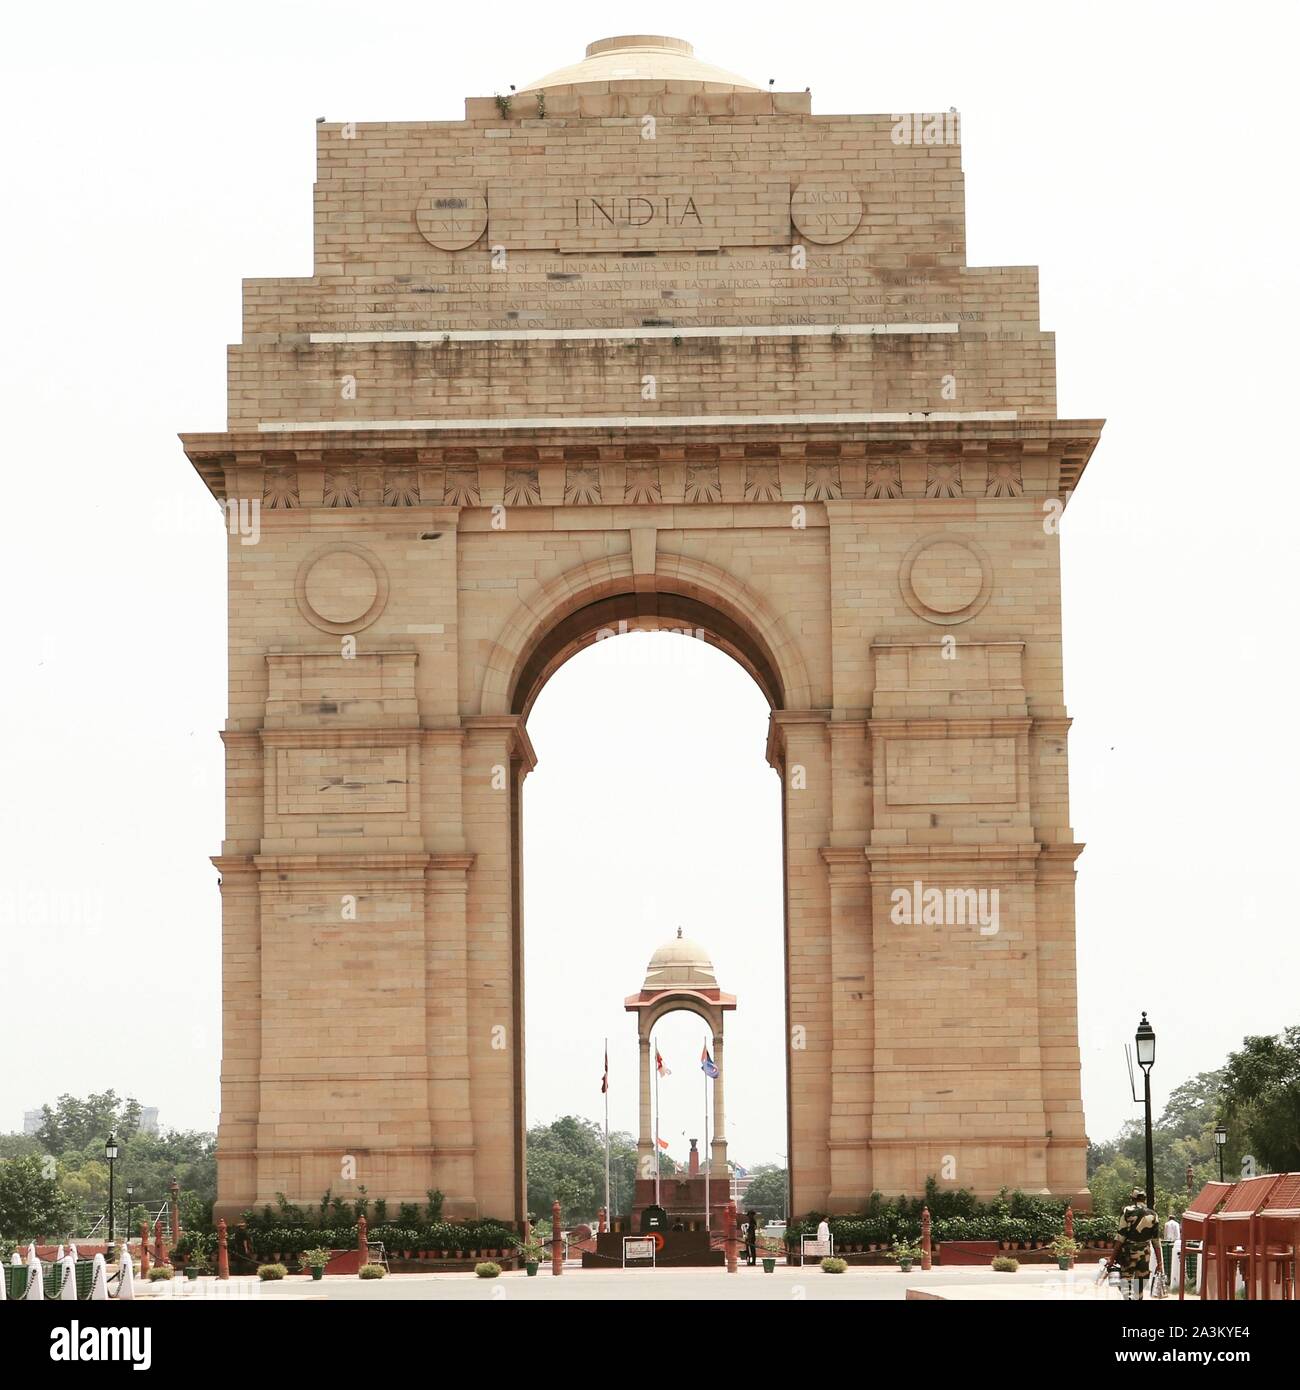 The India Gate is a war memorial located astride the Rajpath, on the eastern edge of the ' ceremonial axis' of New Delhi, formerly called Kingsway. Stock Photo